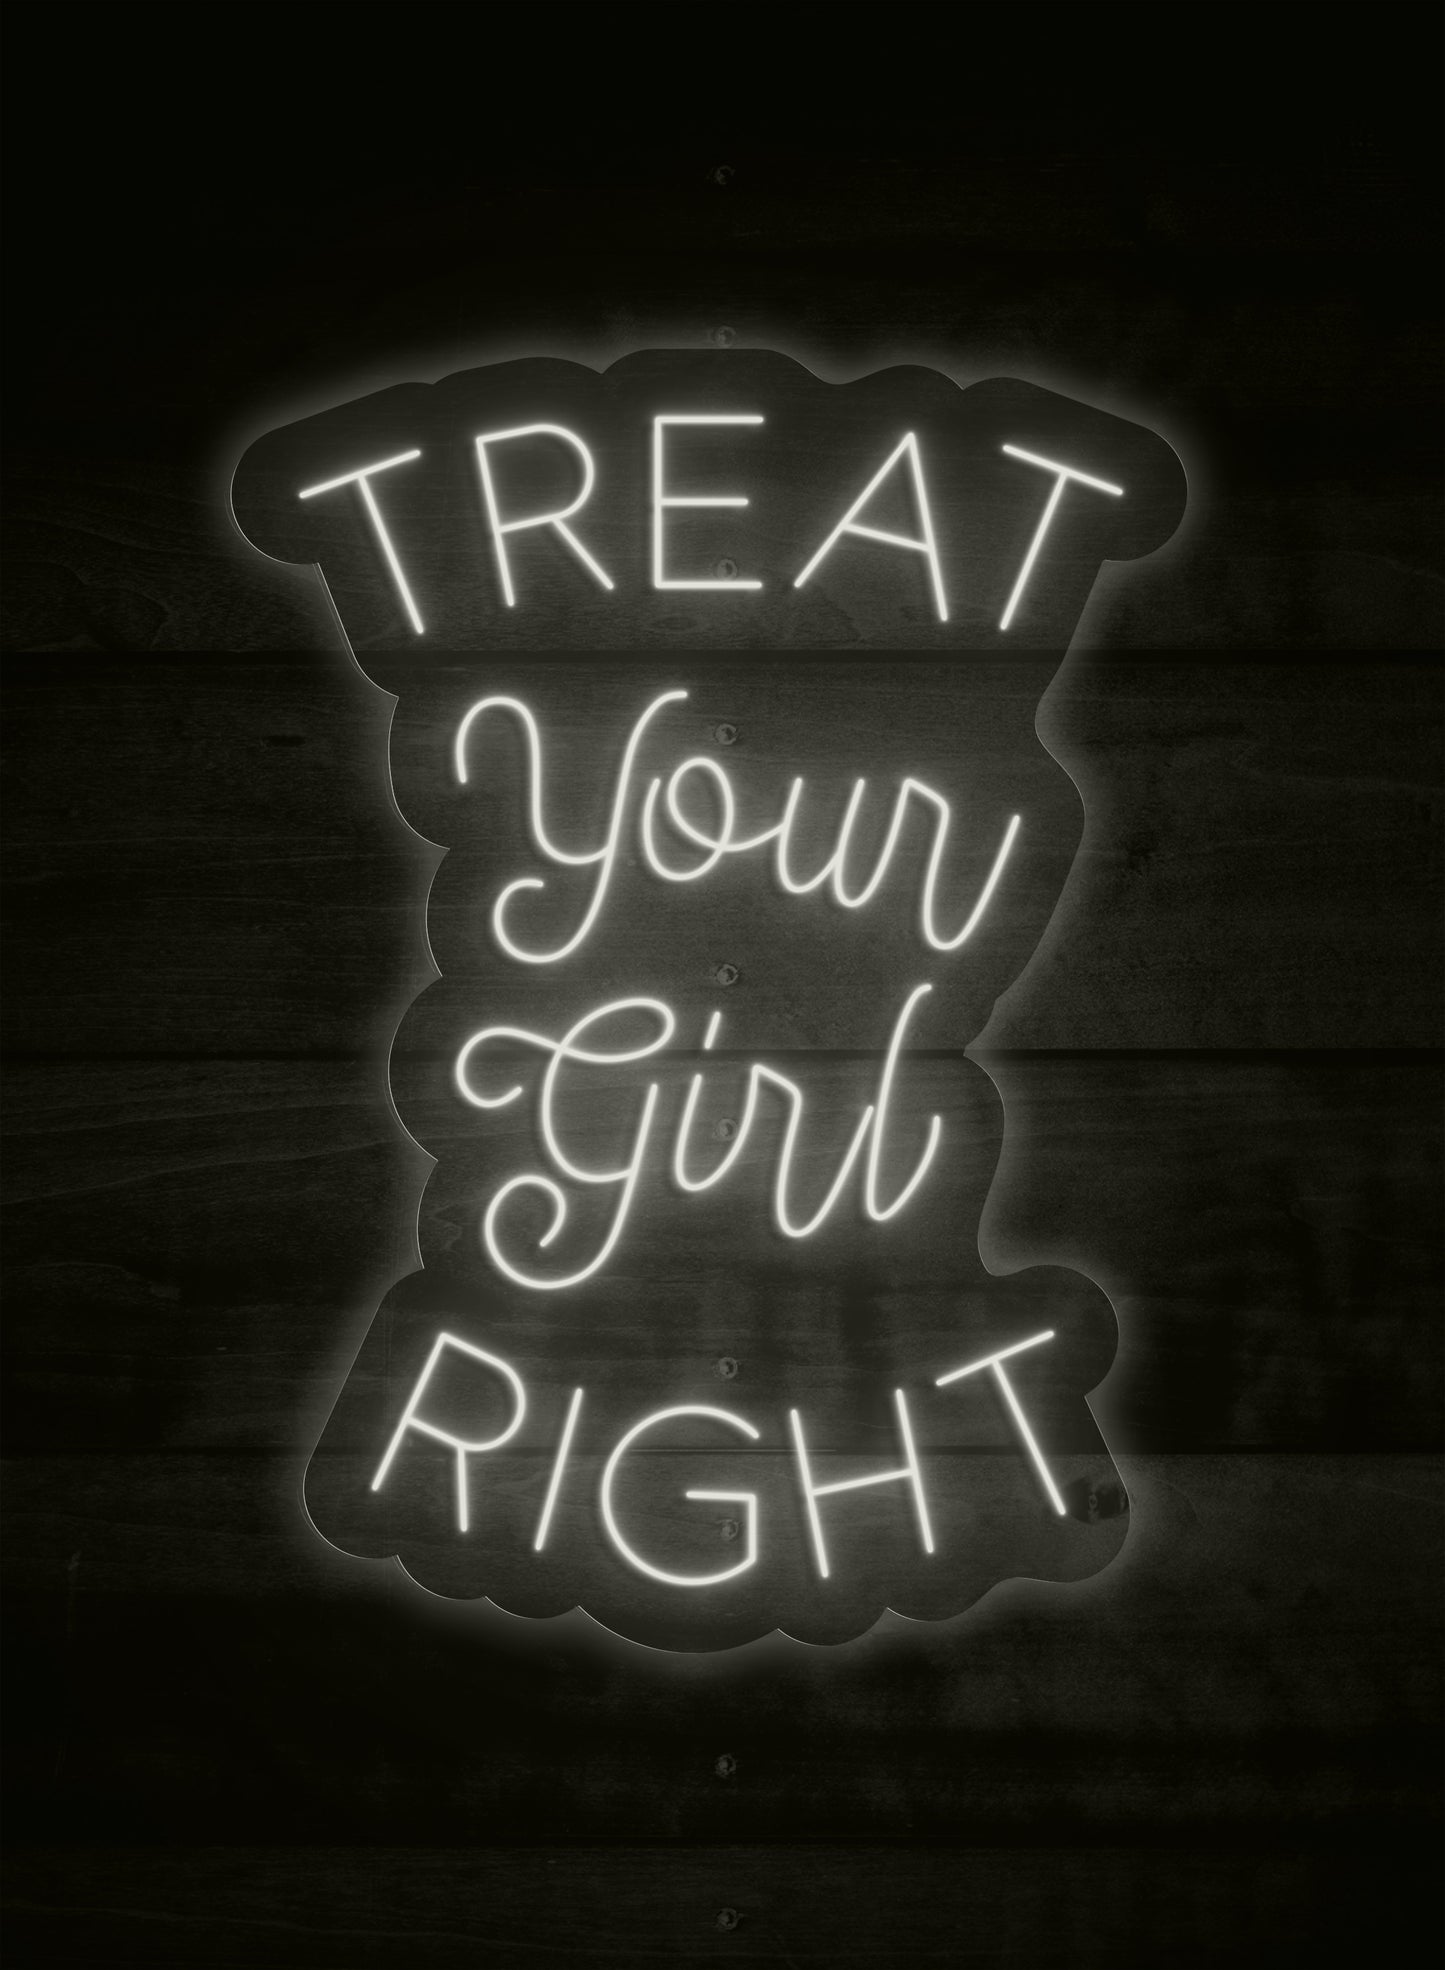 Treat your girl right